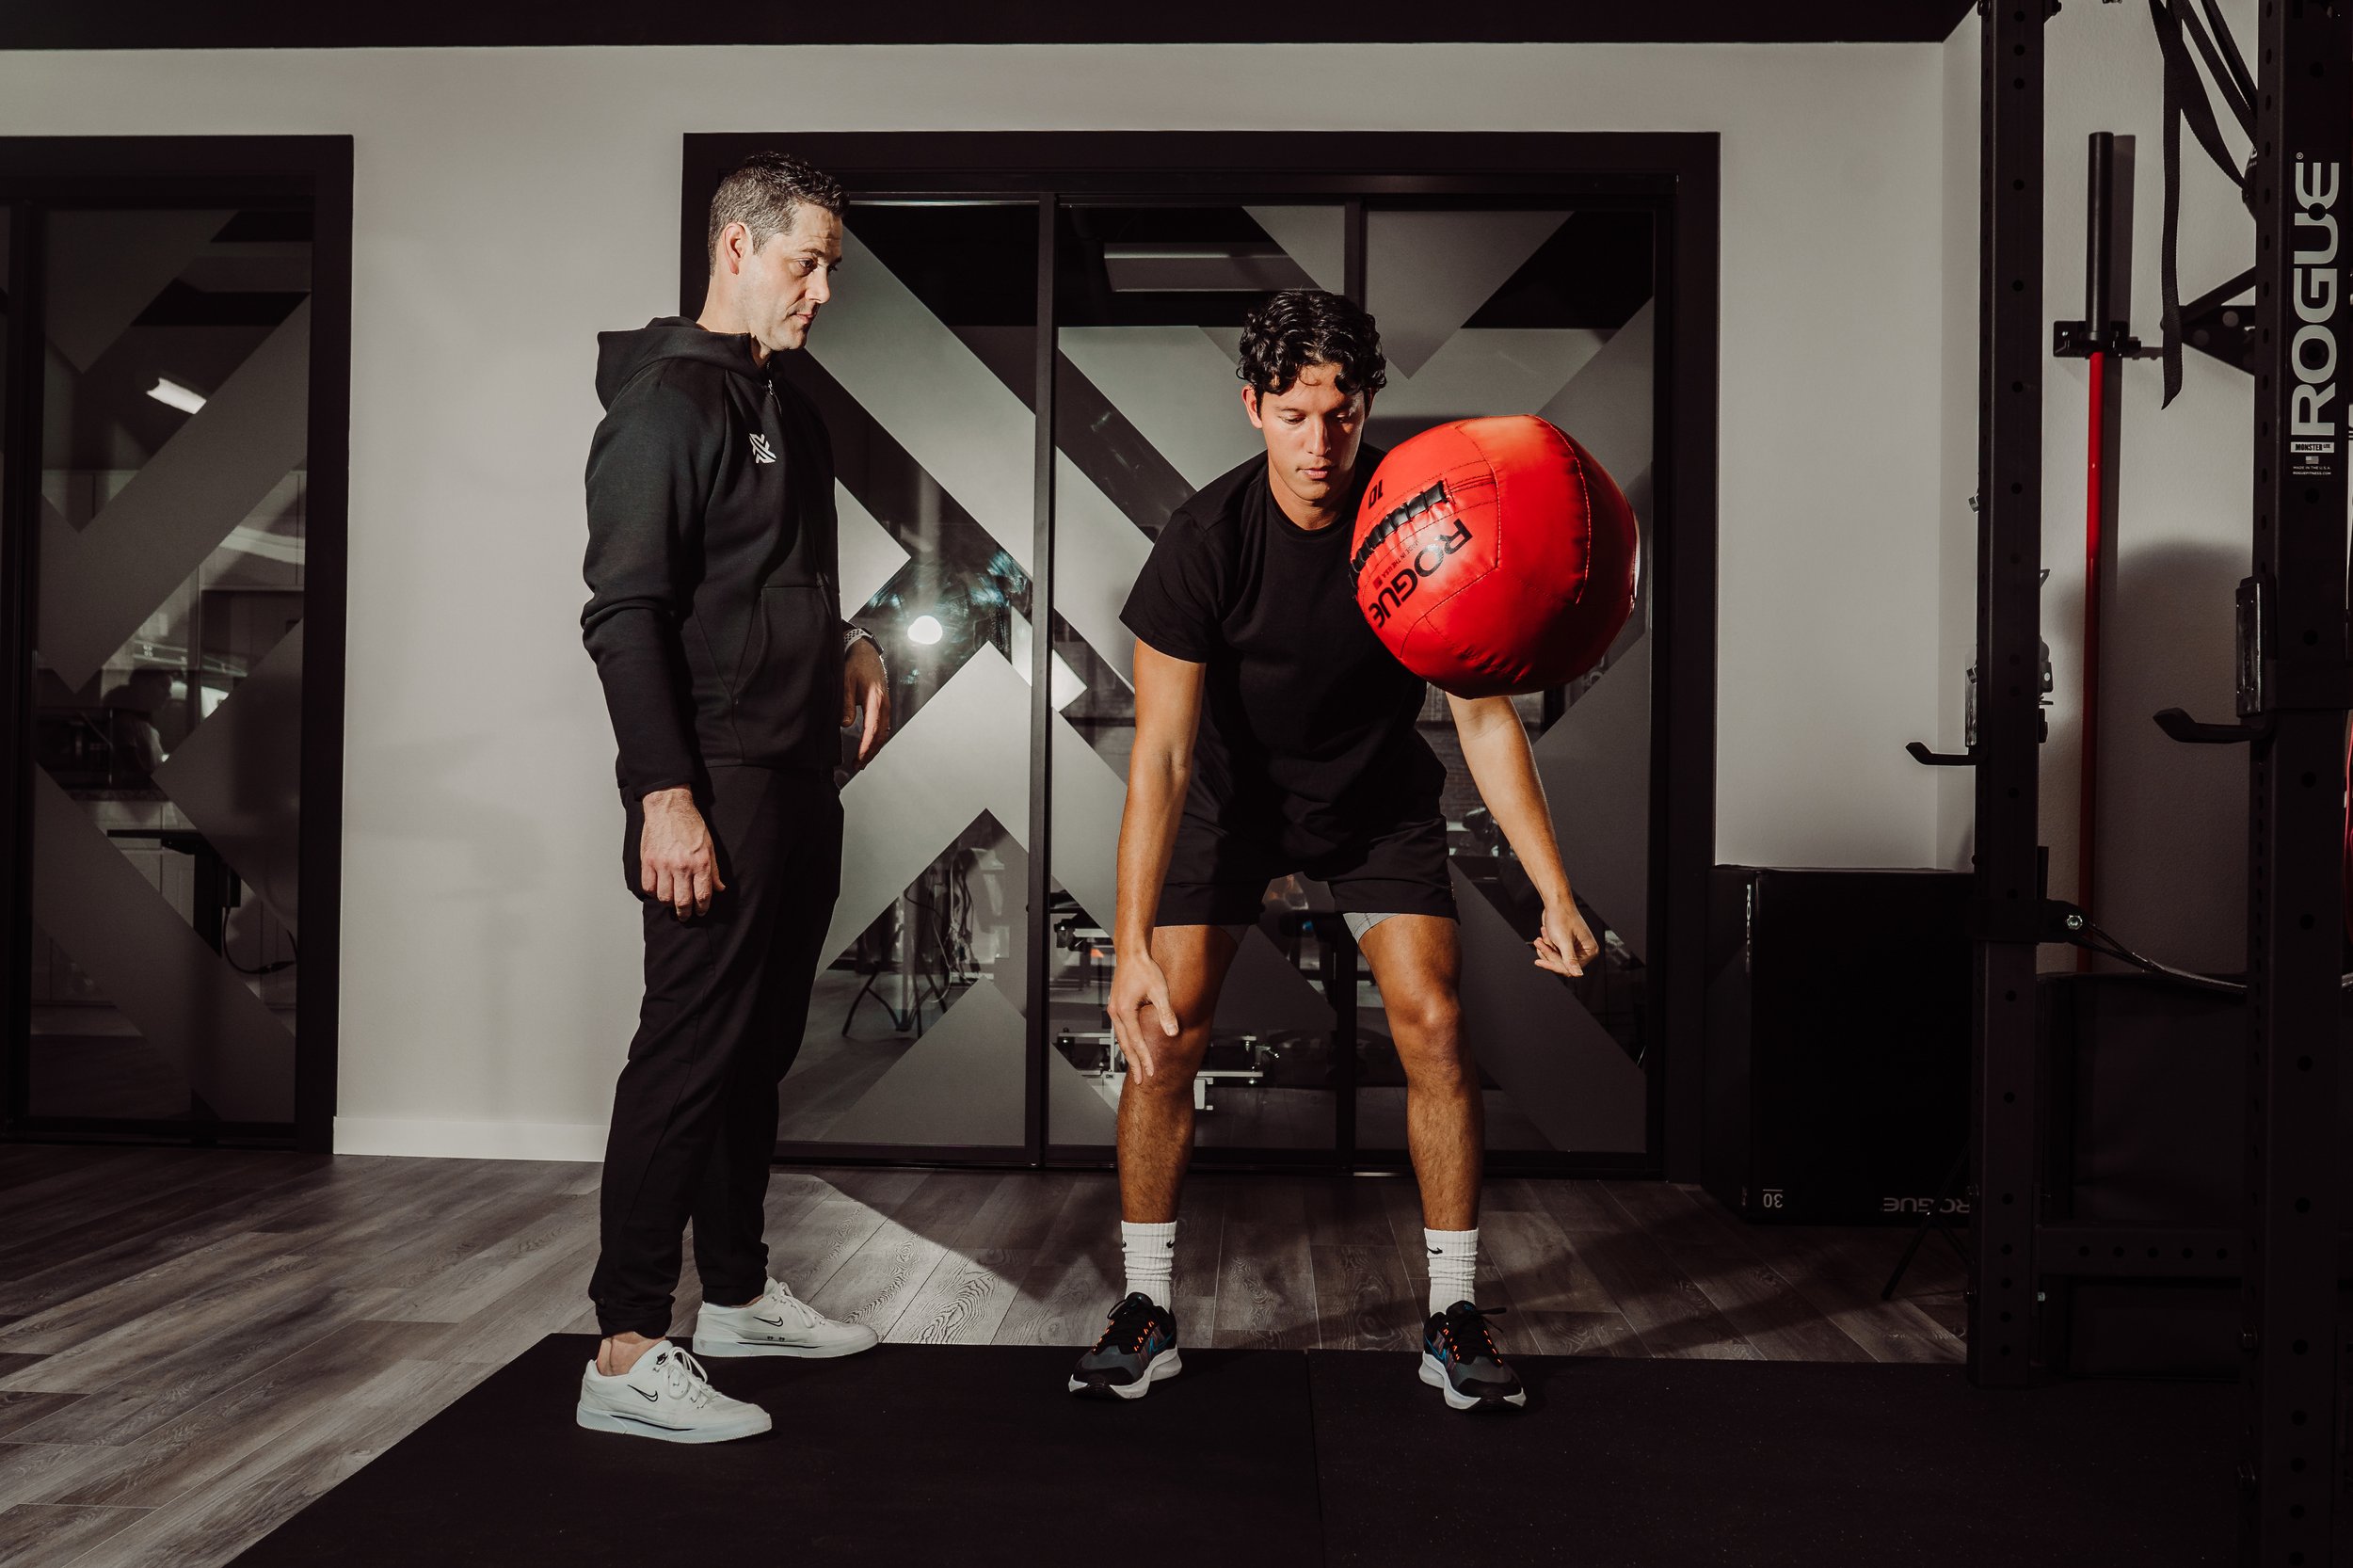 Athlete and therapist work on medicine ball throw drill